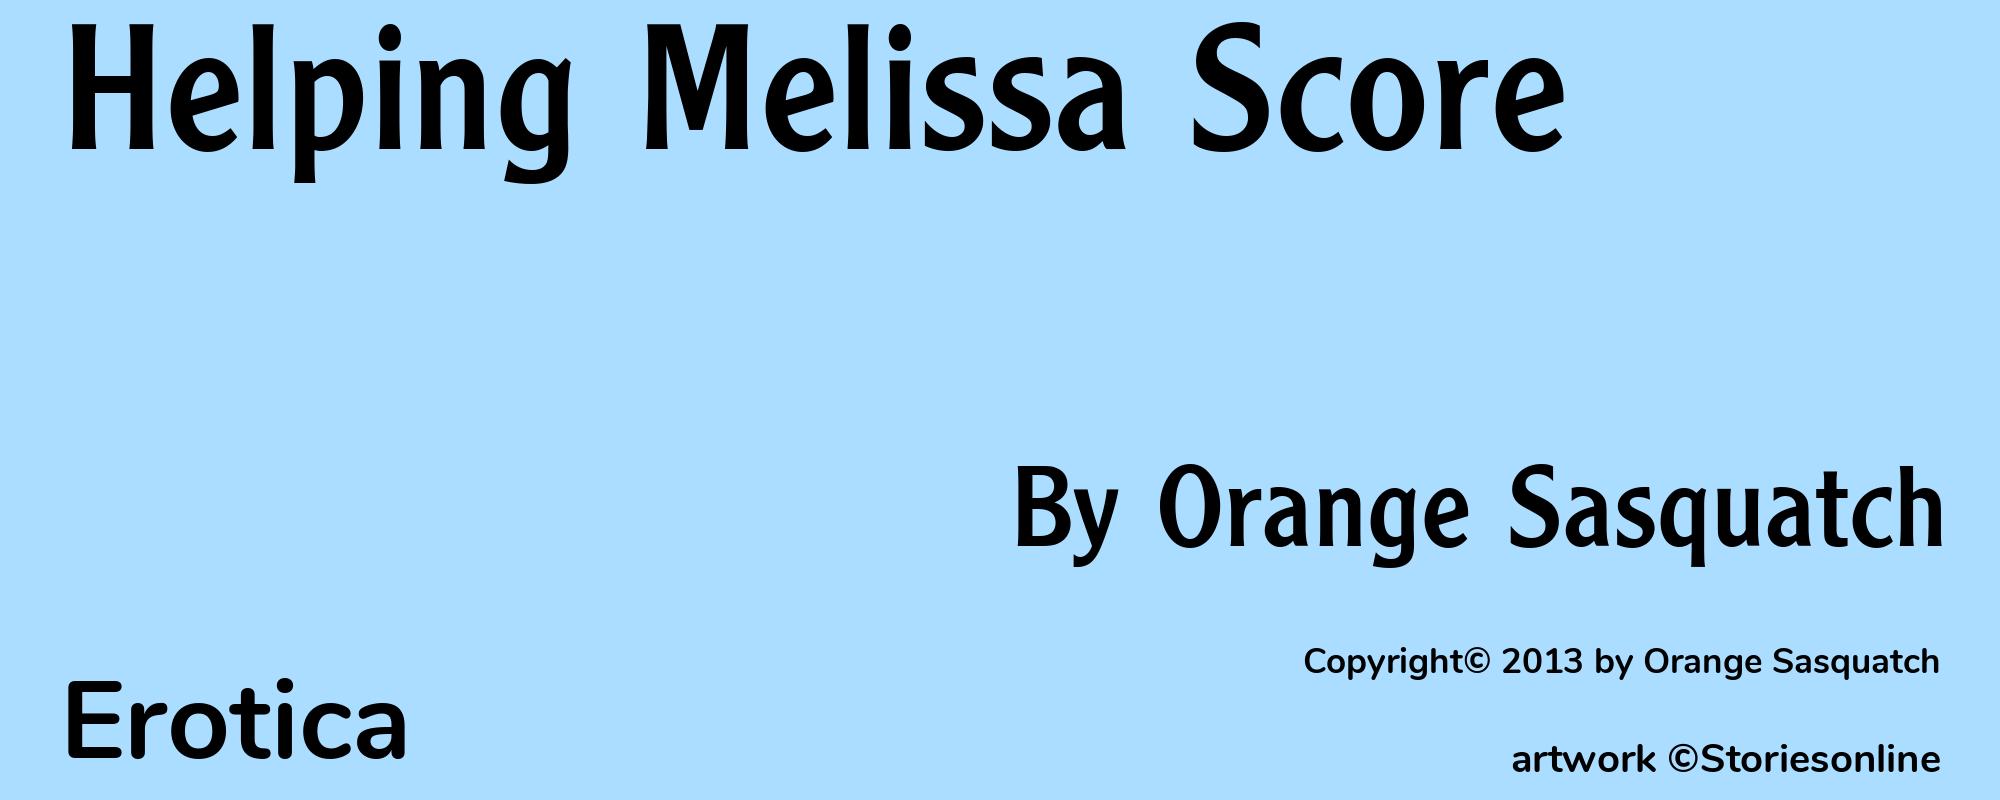 Helping Melissa Score - Cover